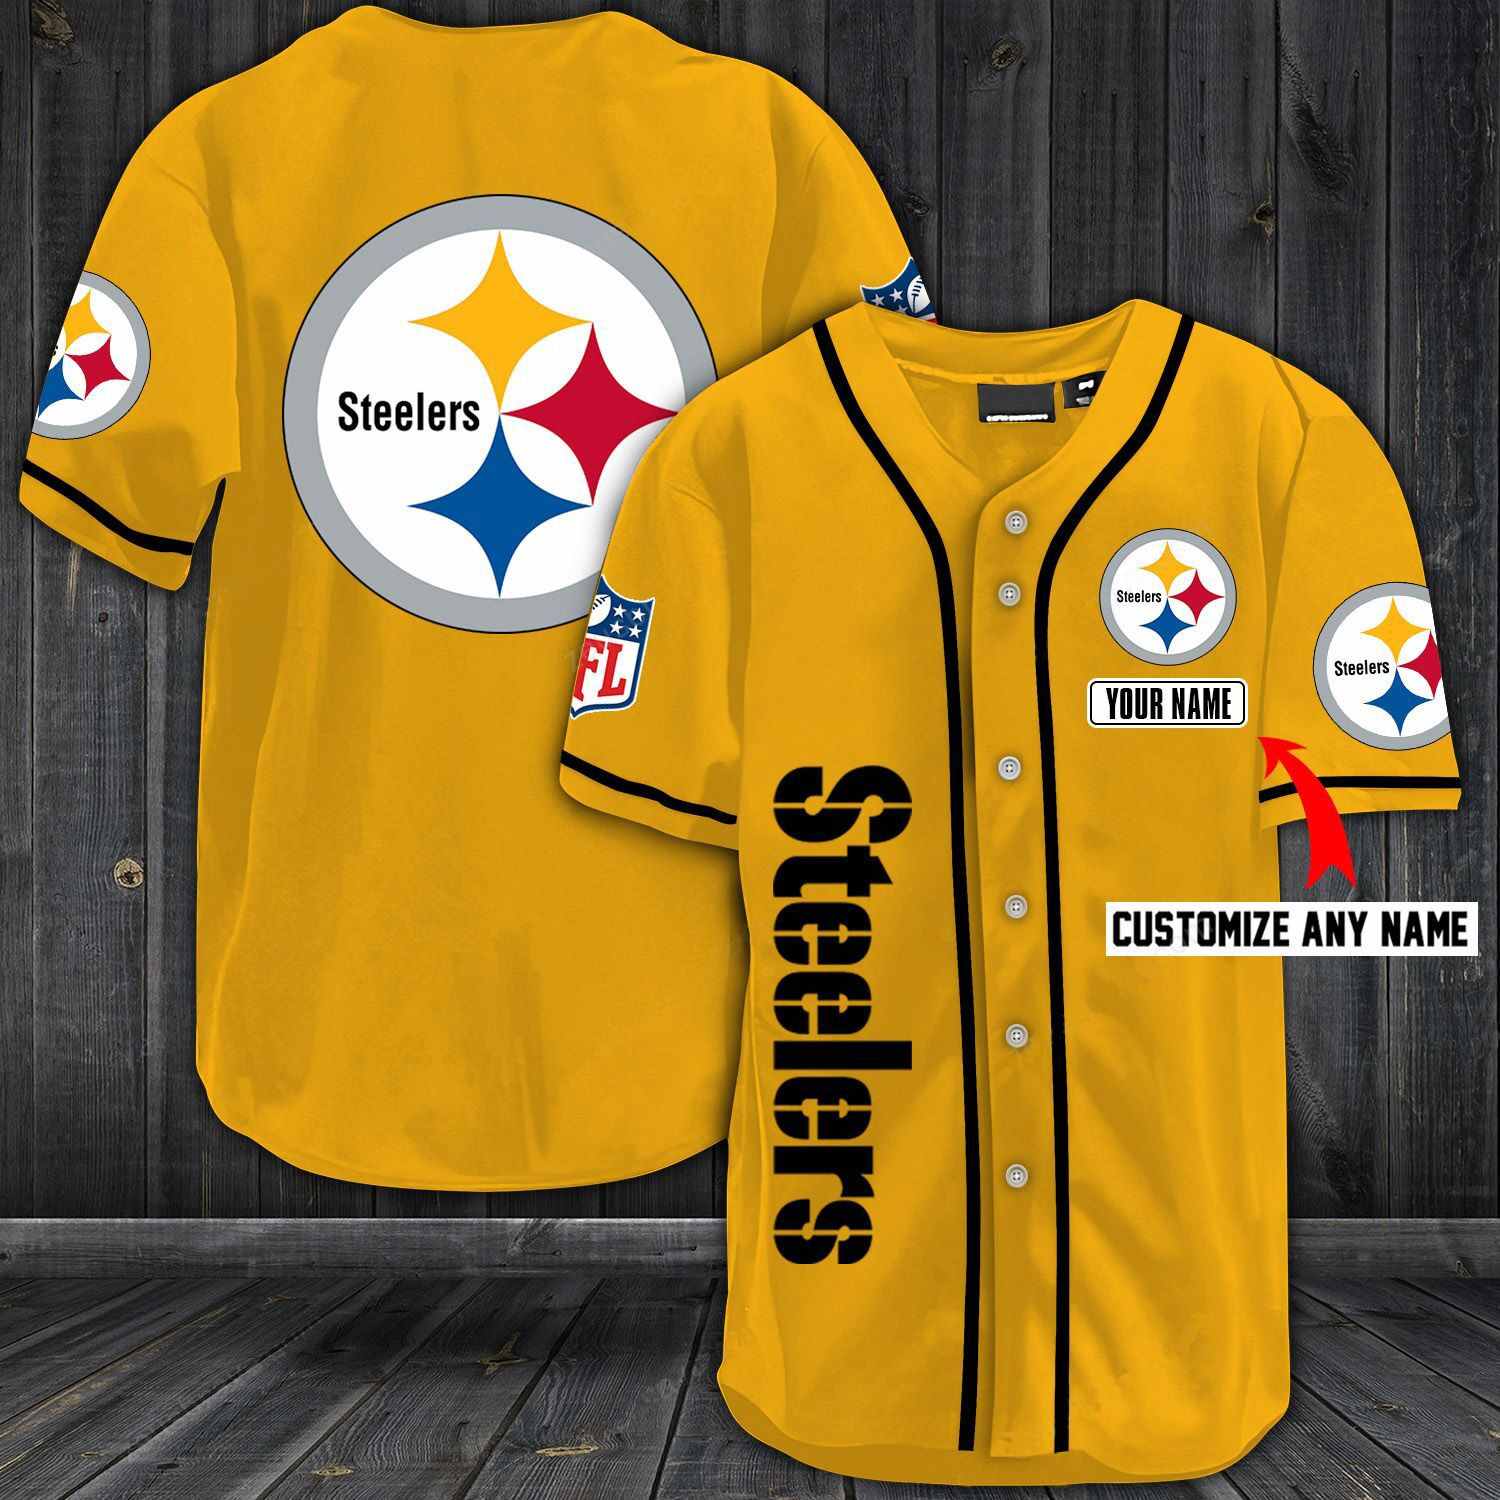 Steelers Baseball Gold Custom Name And Number Jerseys Shirts